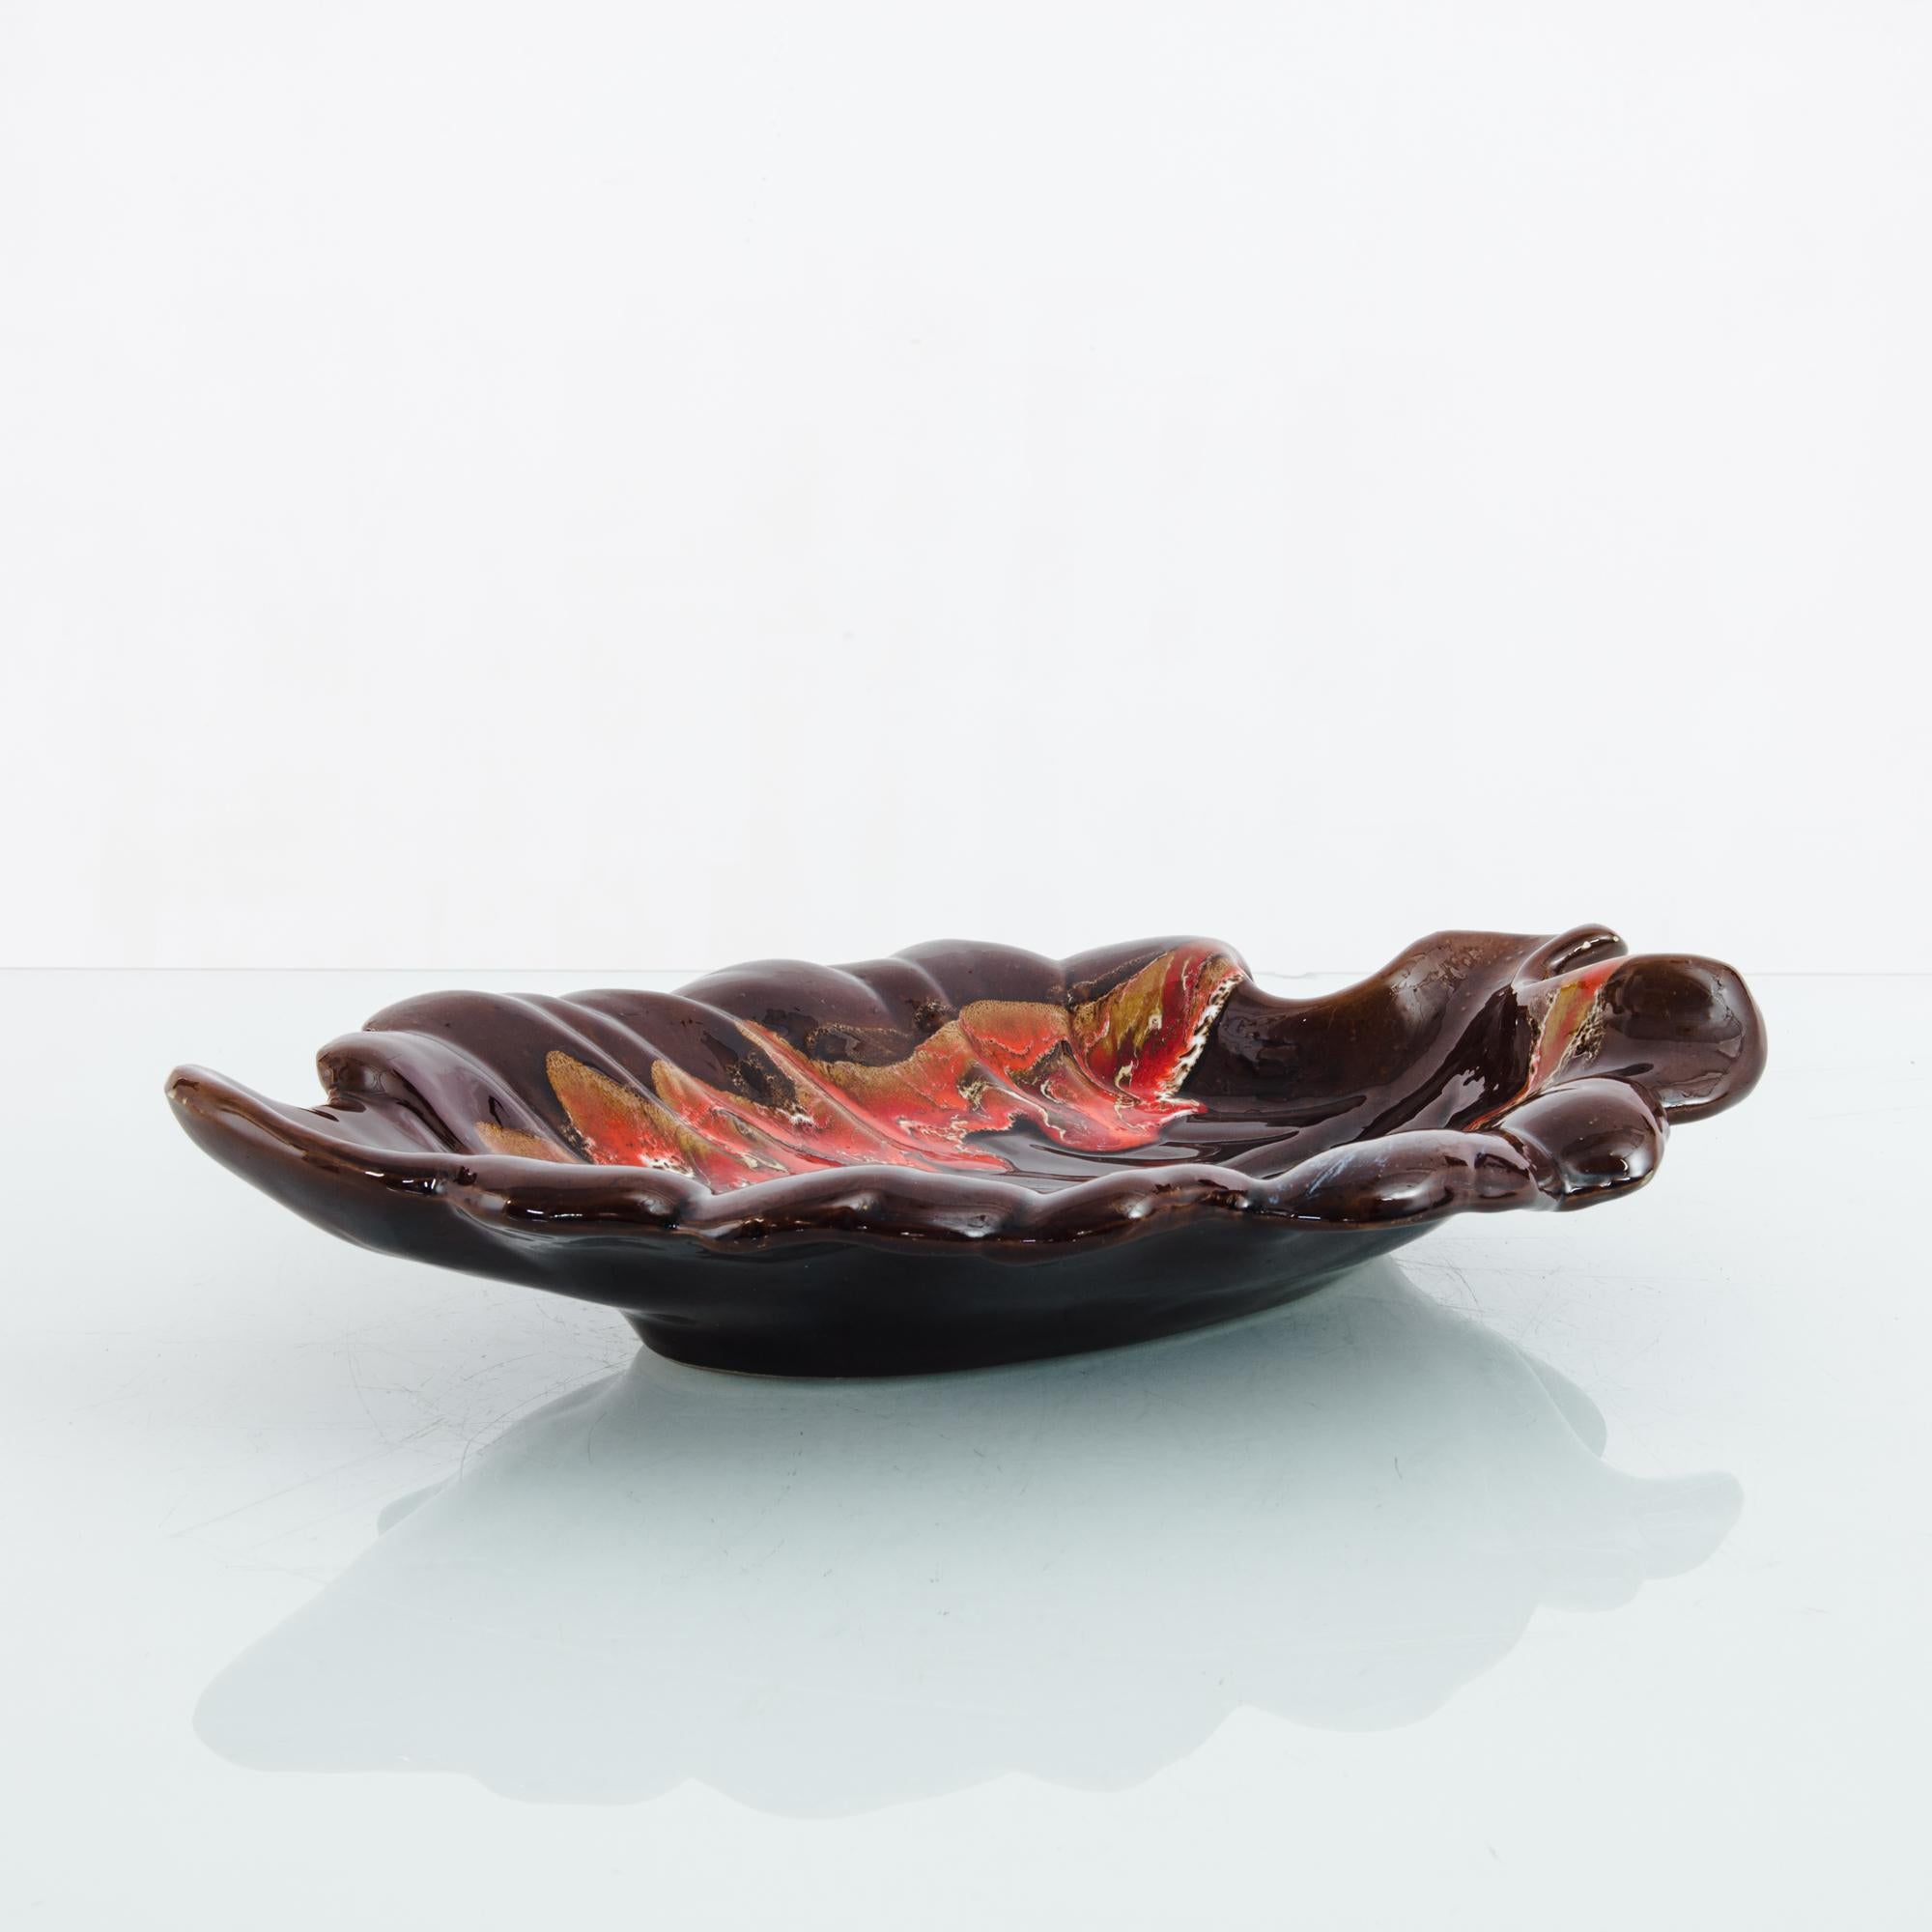 This ceramic bowl was made in France, circa 1960. Crafted with waves that rise on the sides, the bowl resembles a leaf with curled edges. A captivating vintage piece with a rich burnt sienna glaze and a flaming lake of red, ochre, and white within.